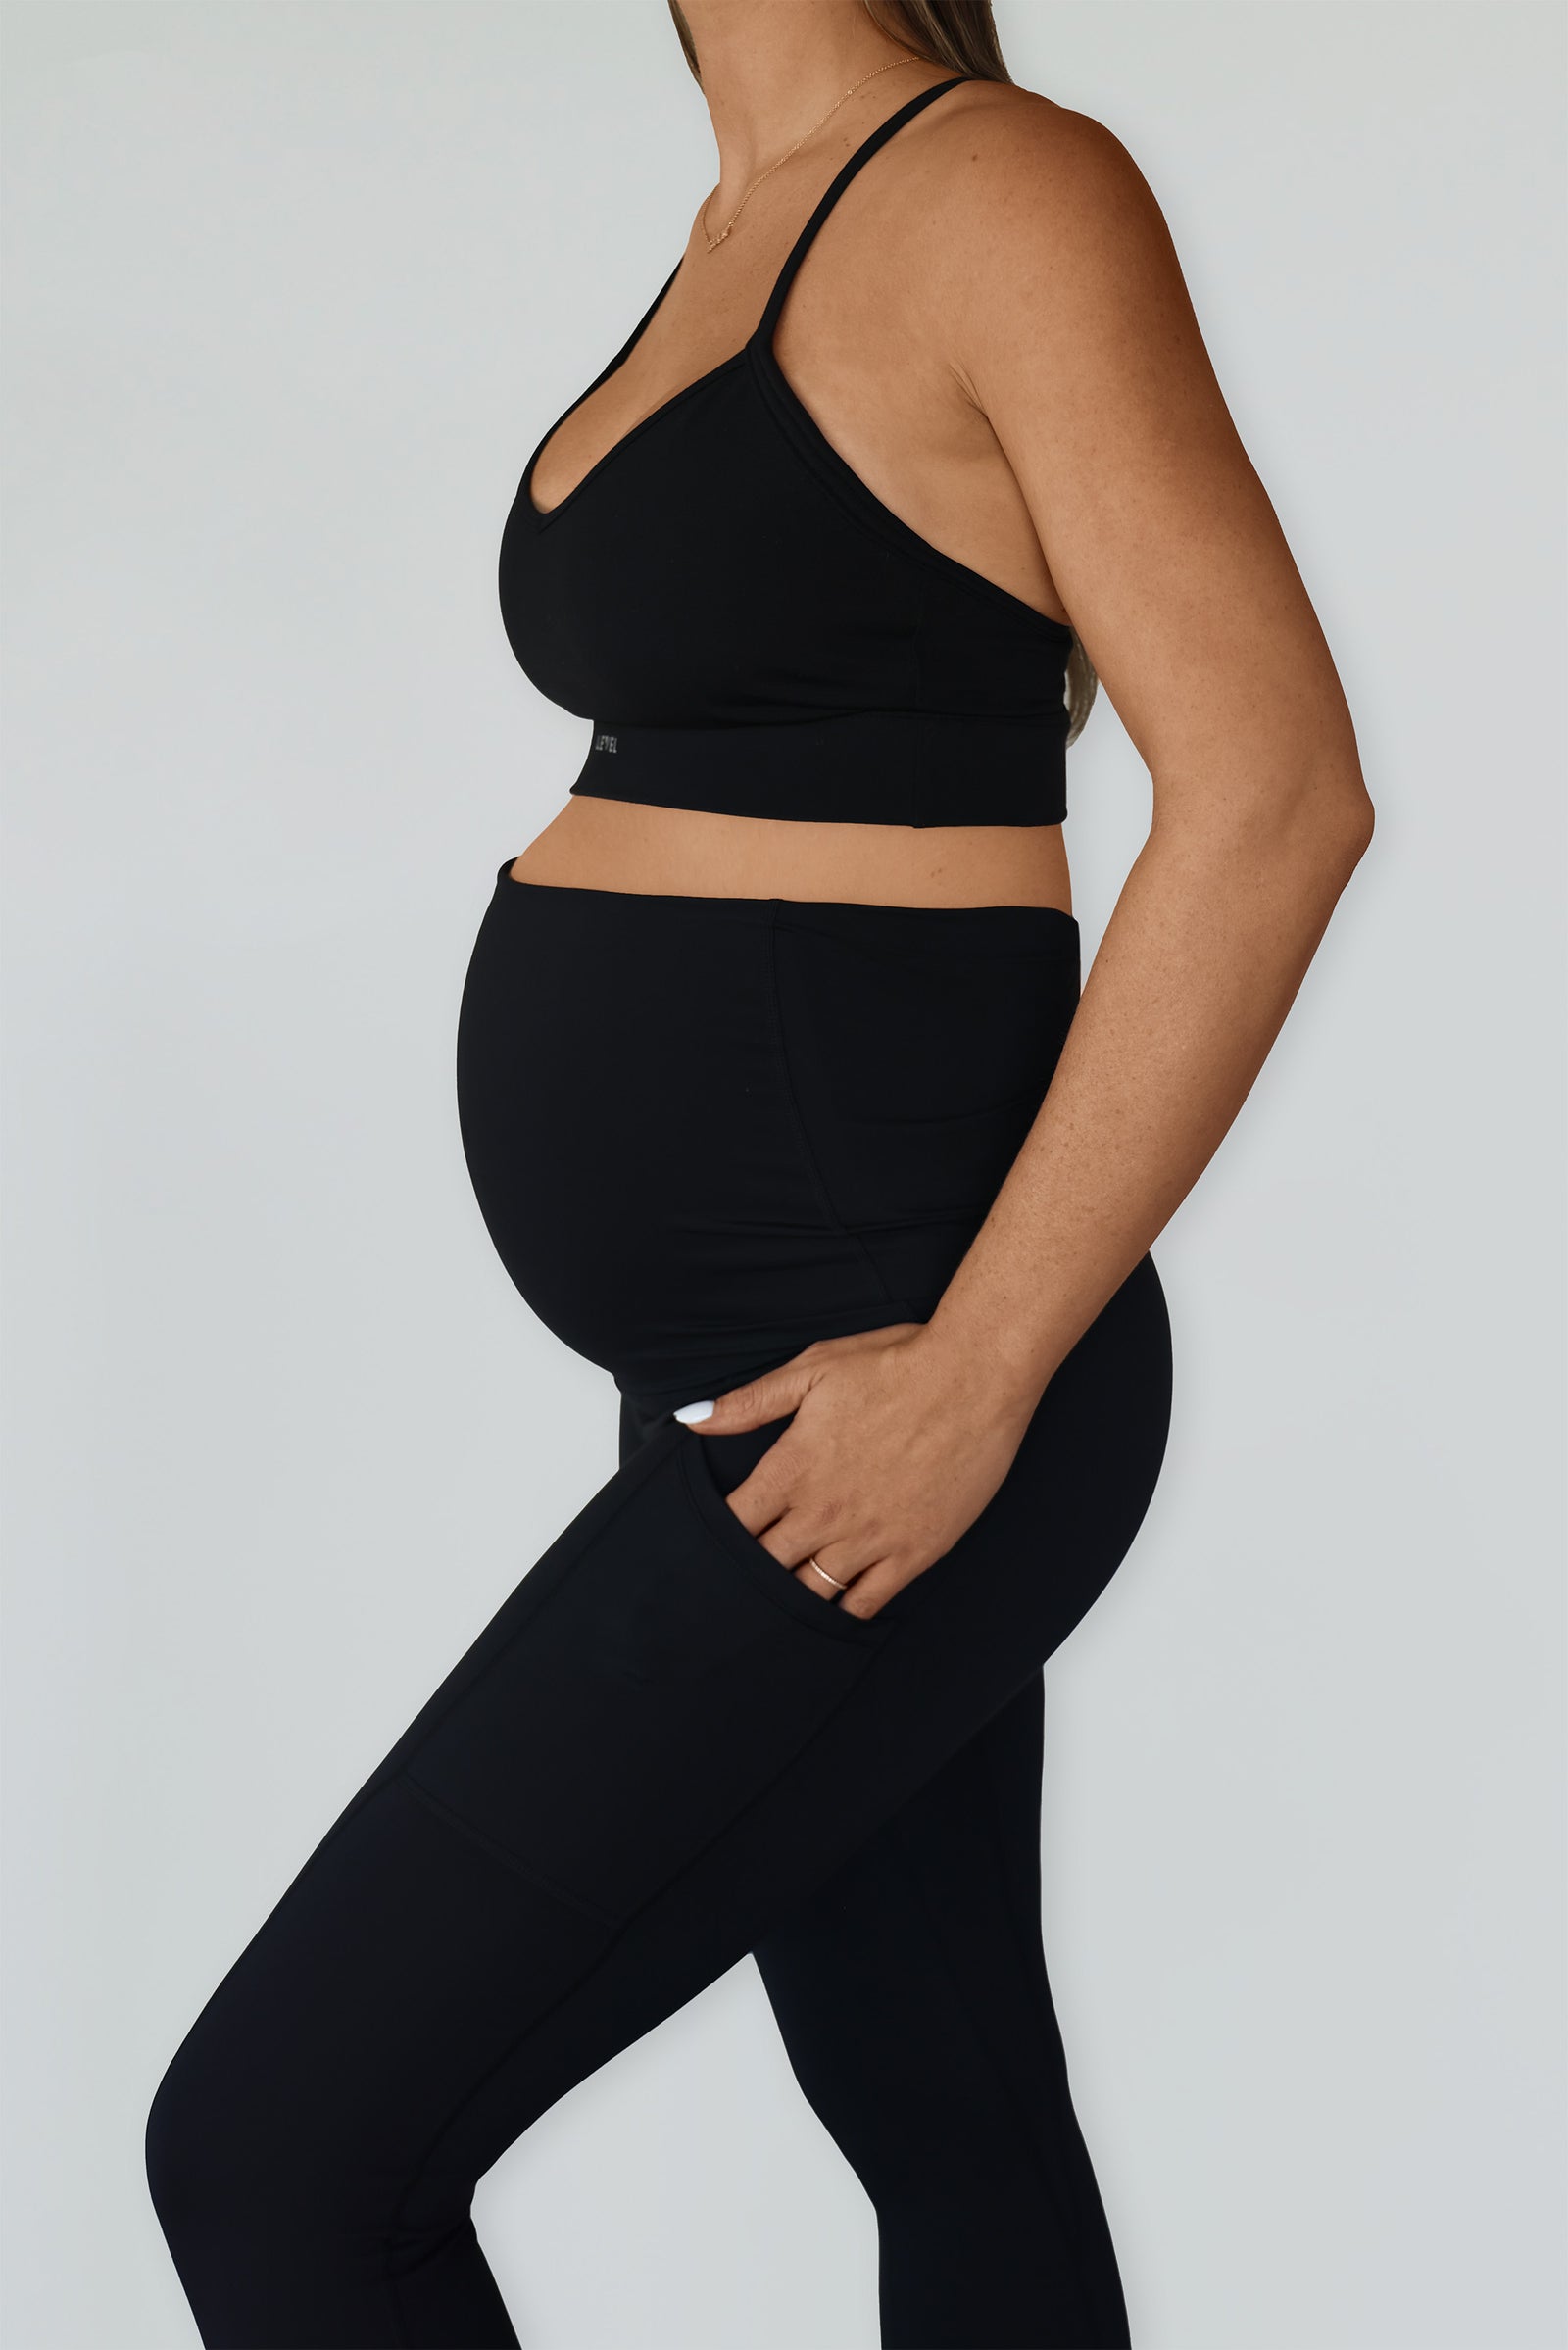 Maternity Cropped Leggings With Pockets 3/4 Length High Waist Sizes 8 - 22  LCKP